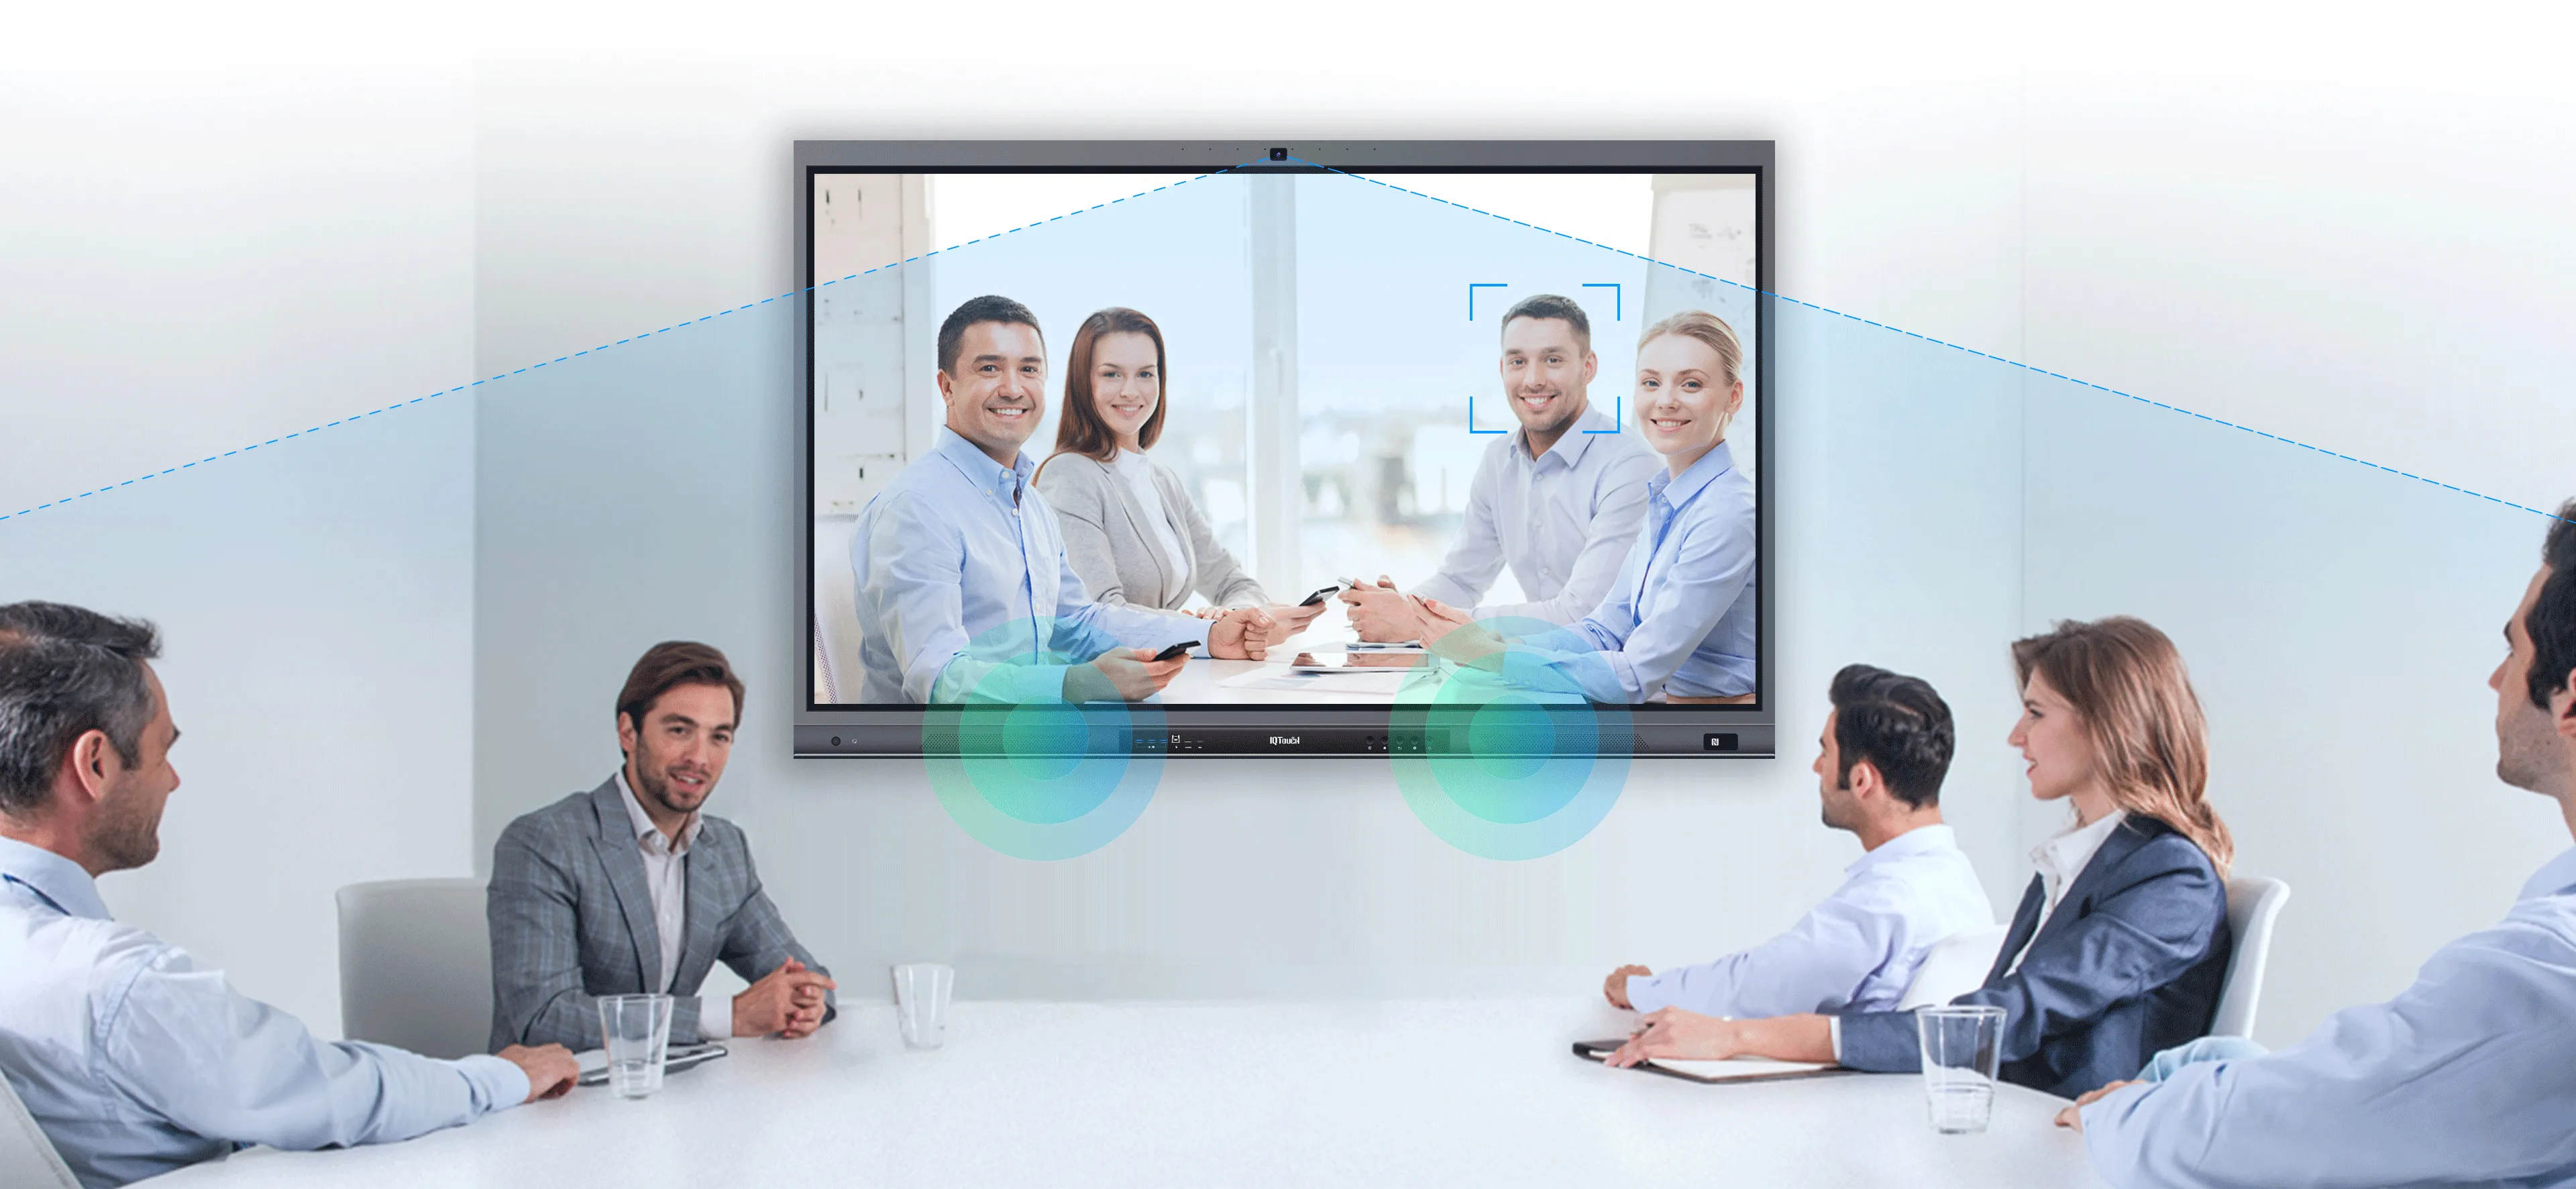 IQTouch QA1300 Pro is suitable for video conferencing - people are holding a meeting with IQTouch QA1300 Pro